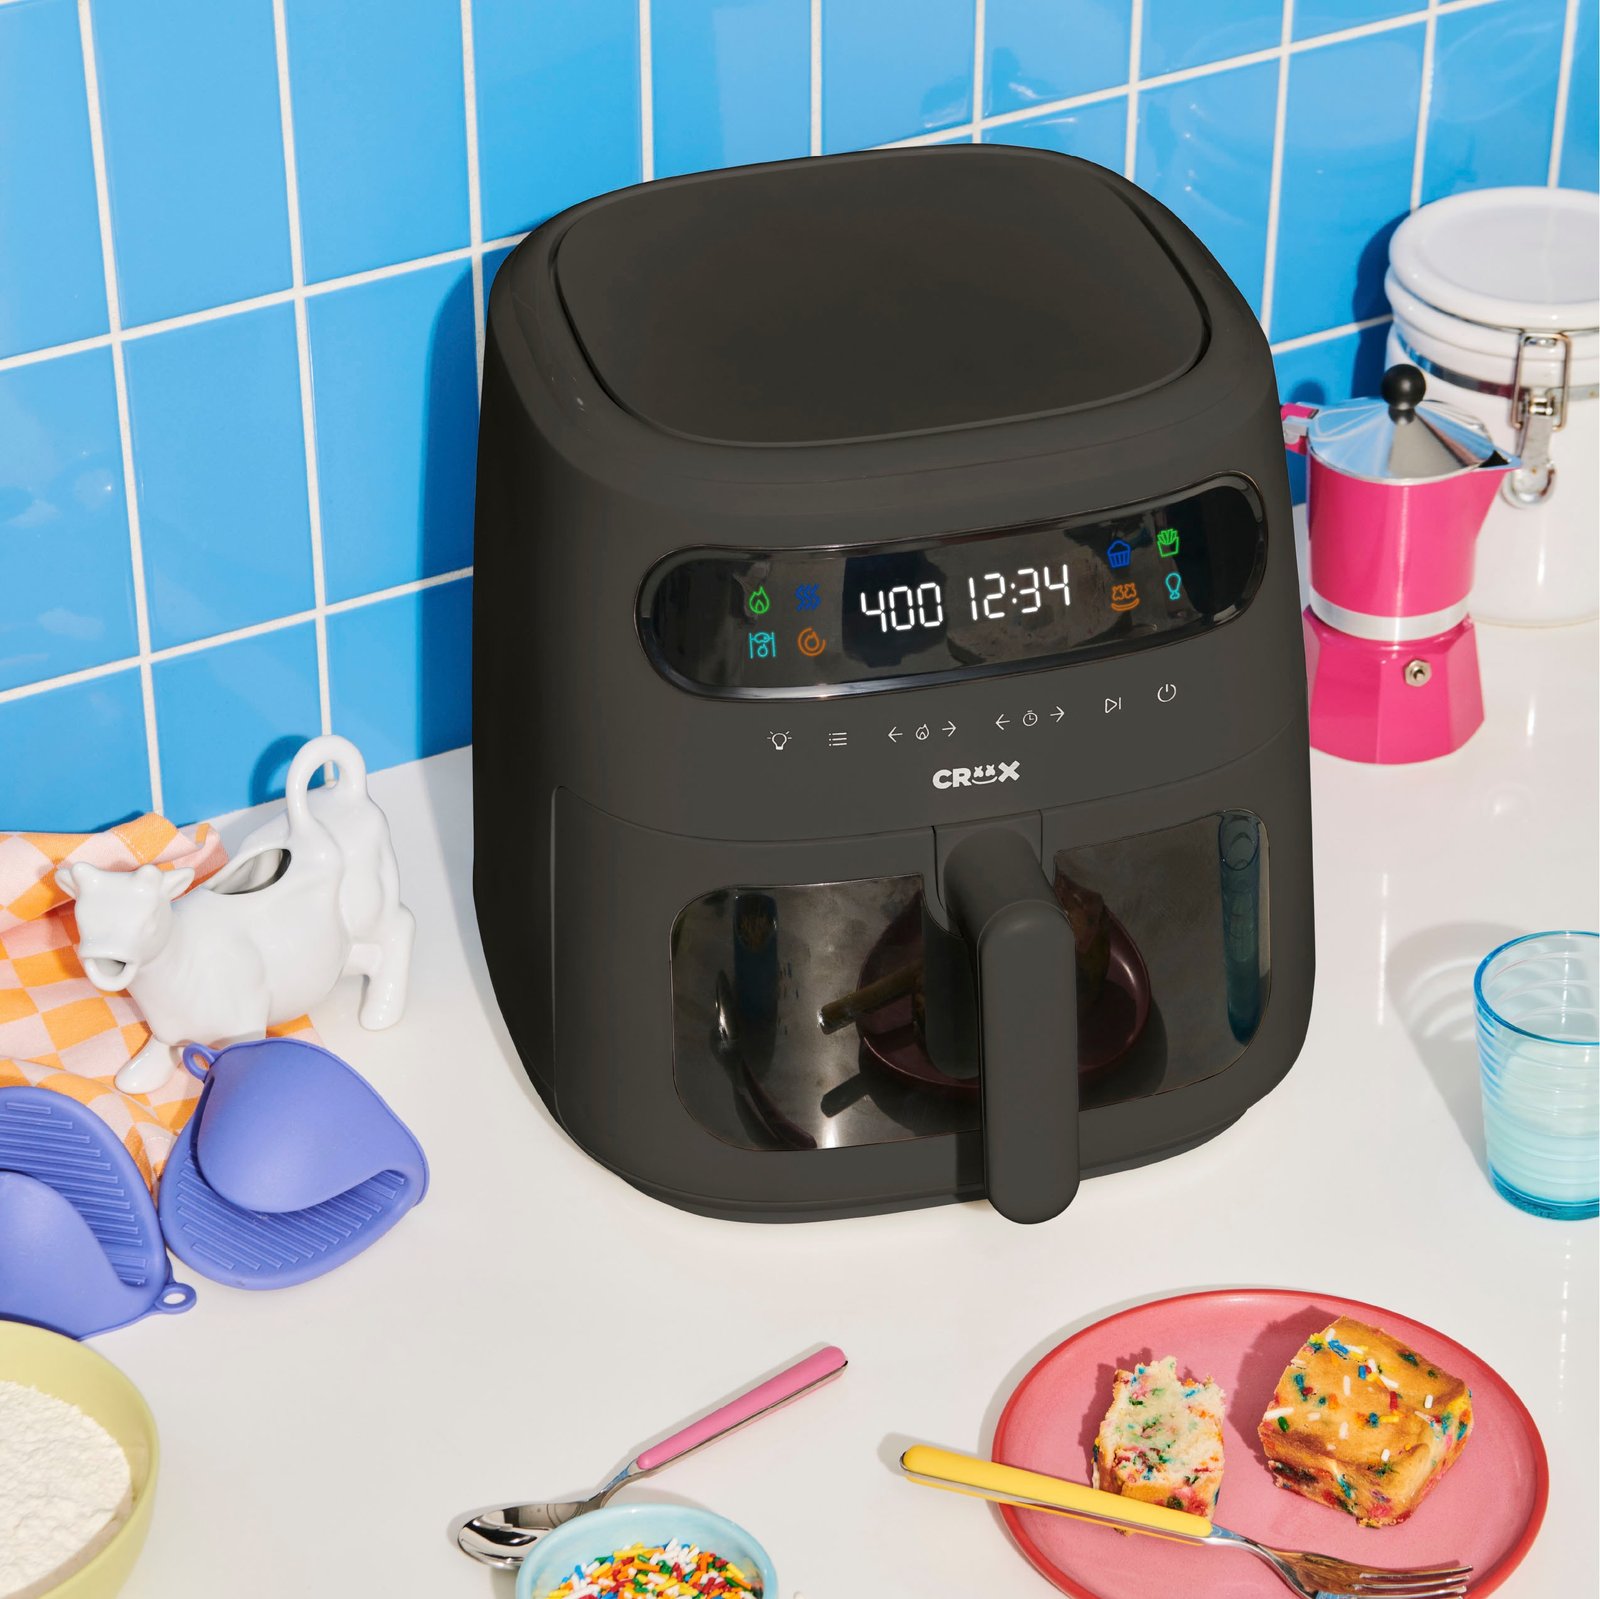 CRUX - 3-qt Digital Air Fryer Kit w TurboCrisp Review and How To Use